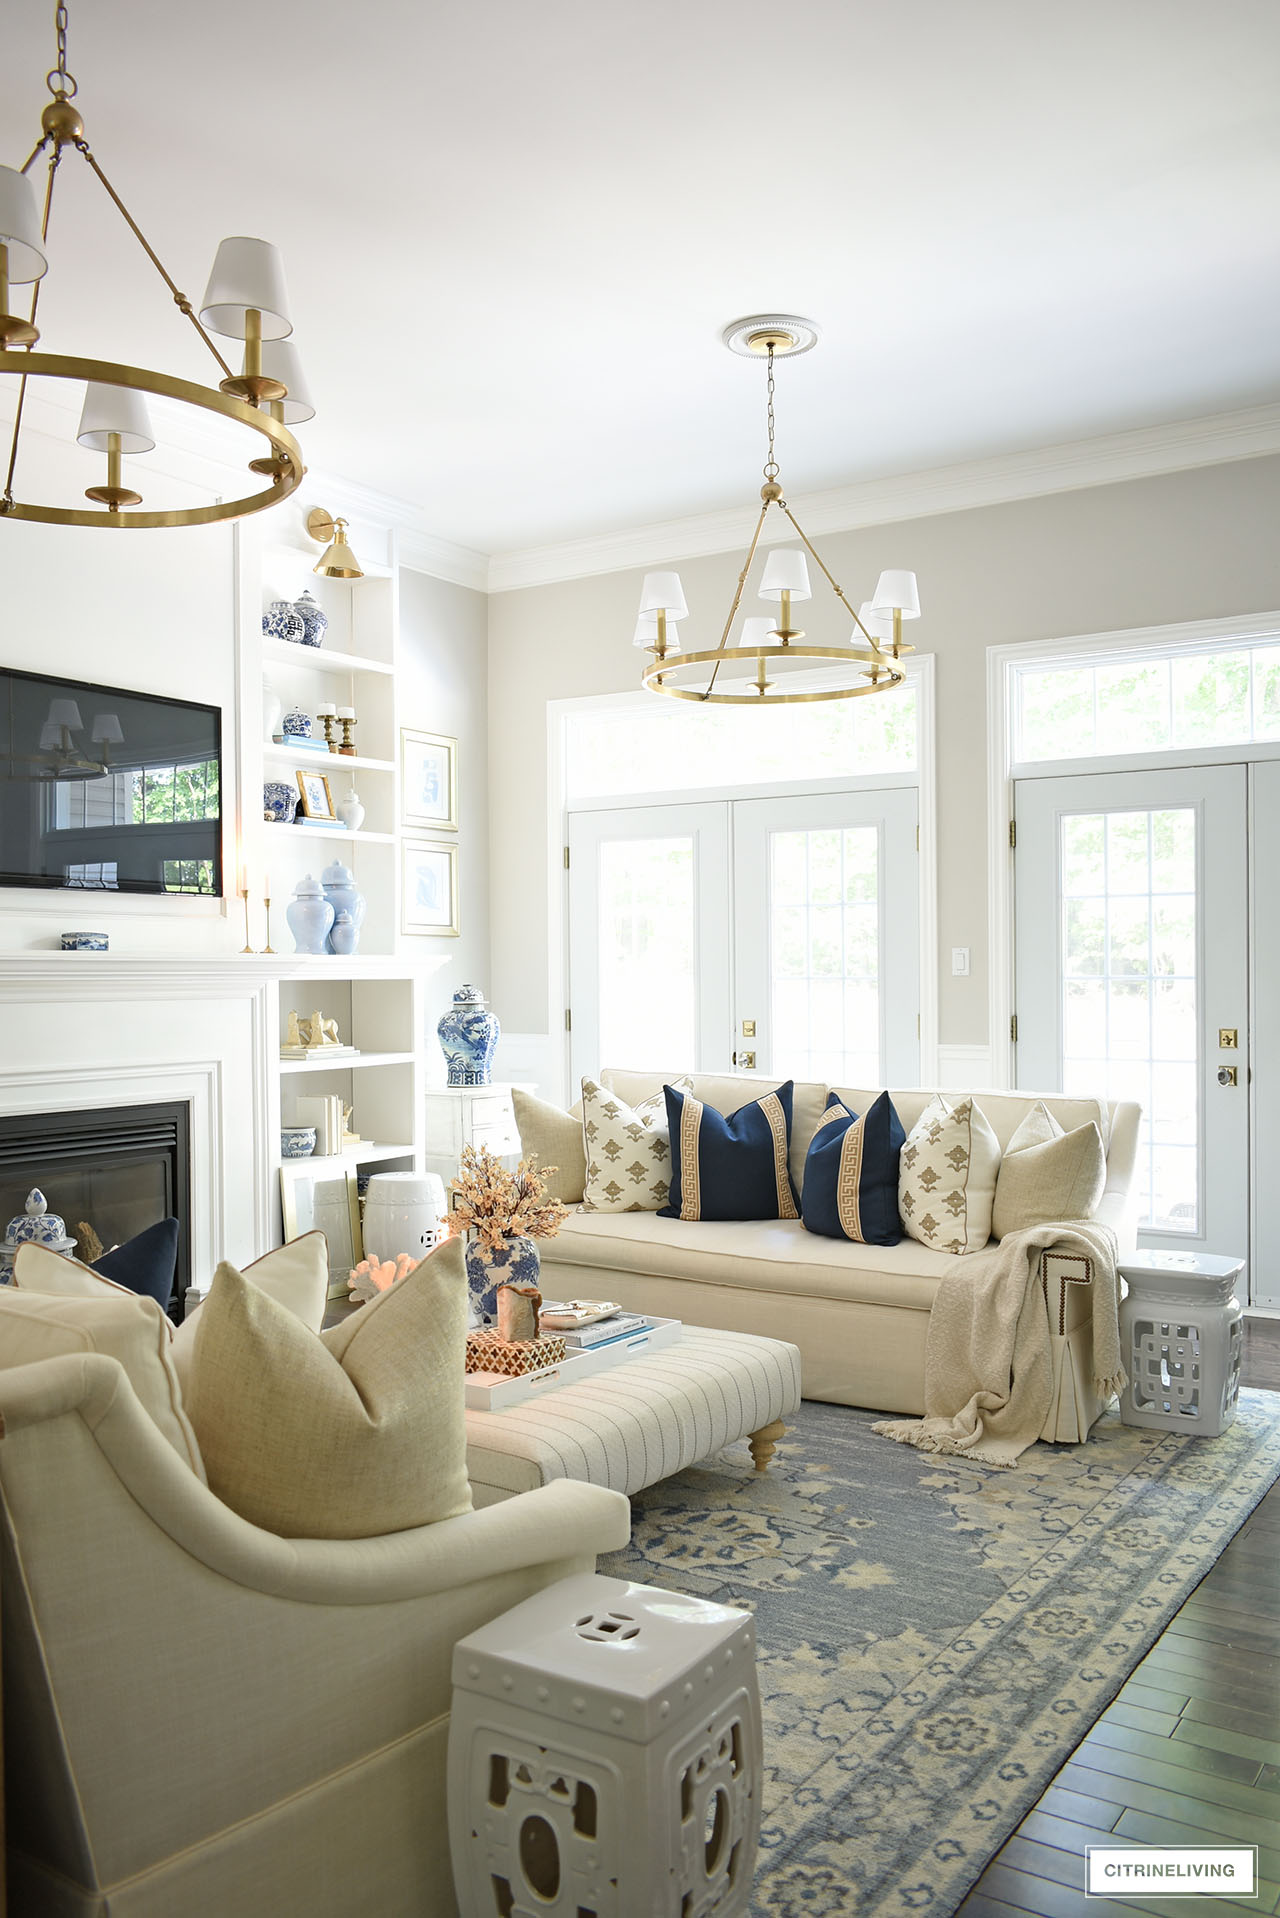 Elegant fall living room decorated with navy blue, tan, warm white and gold accents.